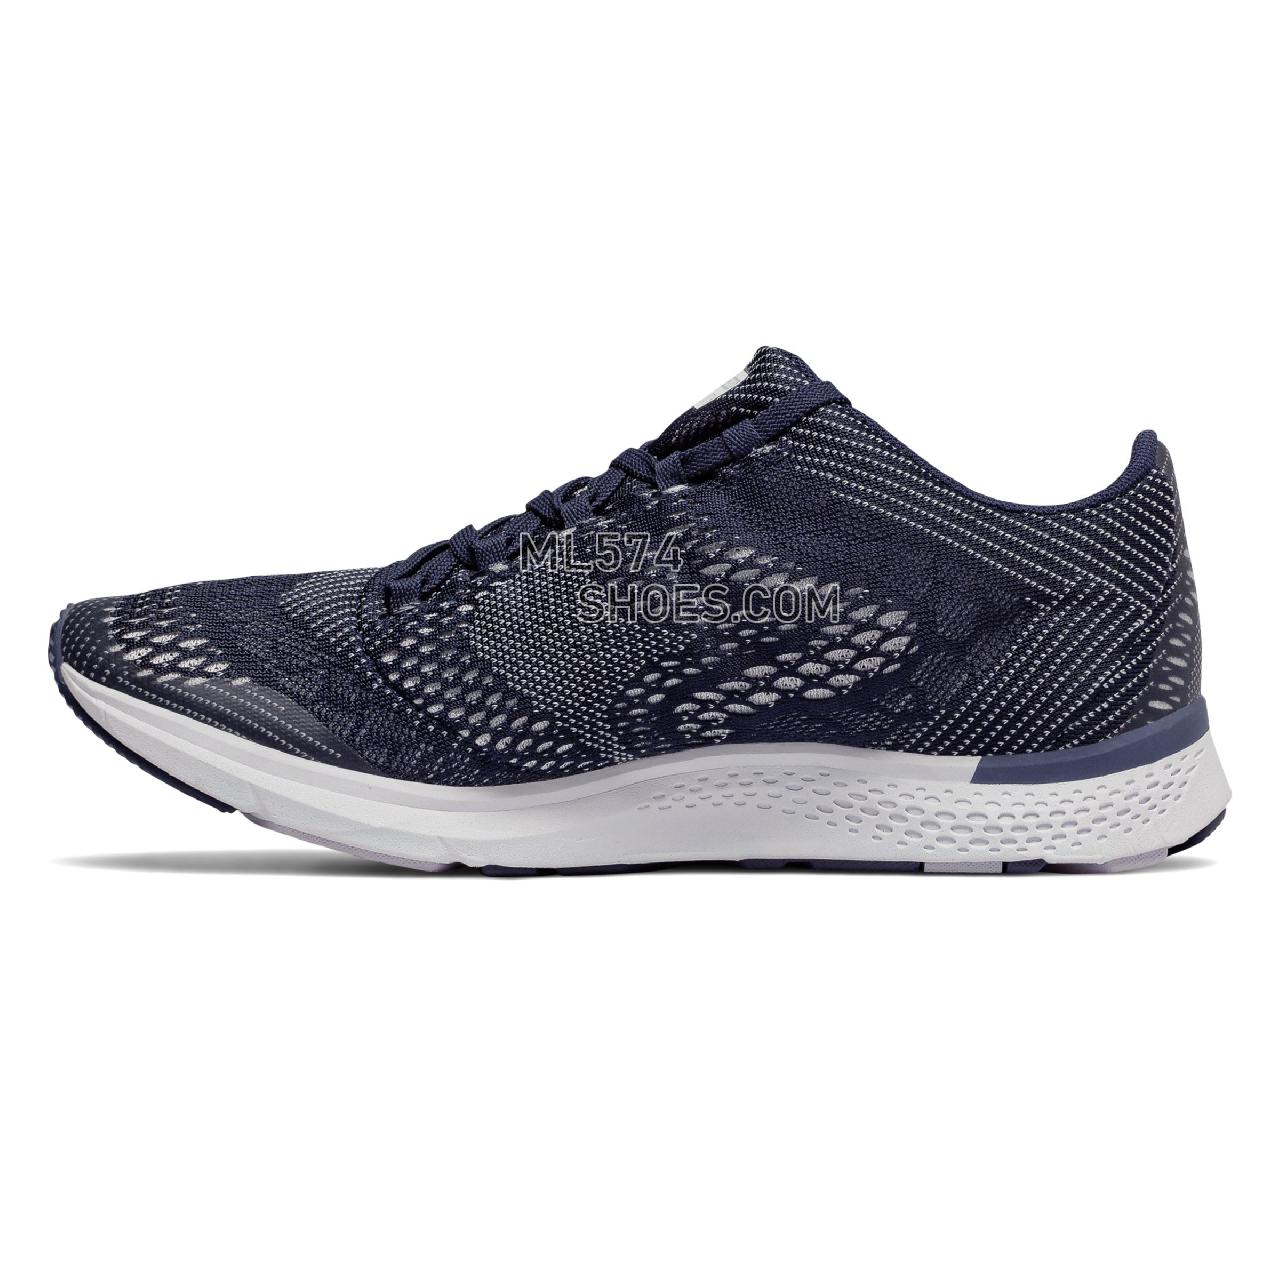 New Balance FuelCore Agility v2 Trainer - Women's 2 - X-training Pigment with Thistle - WXAGLSF2